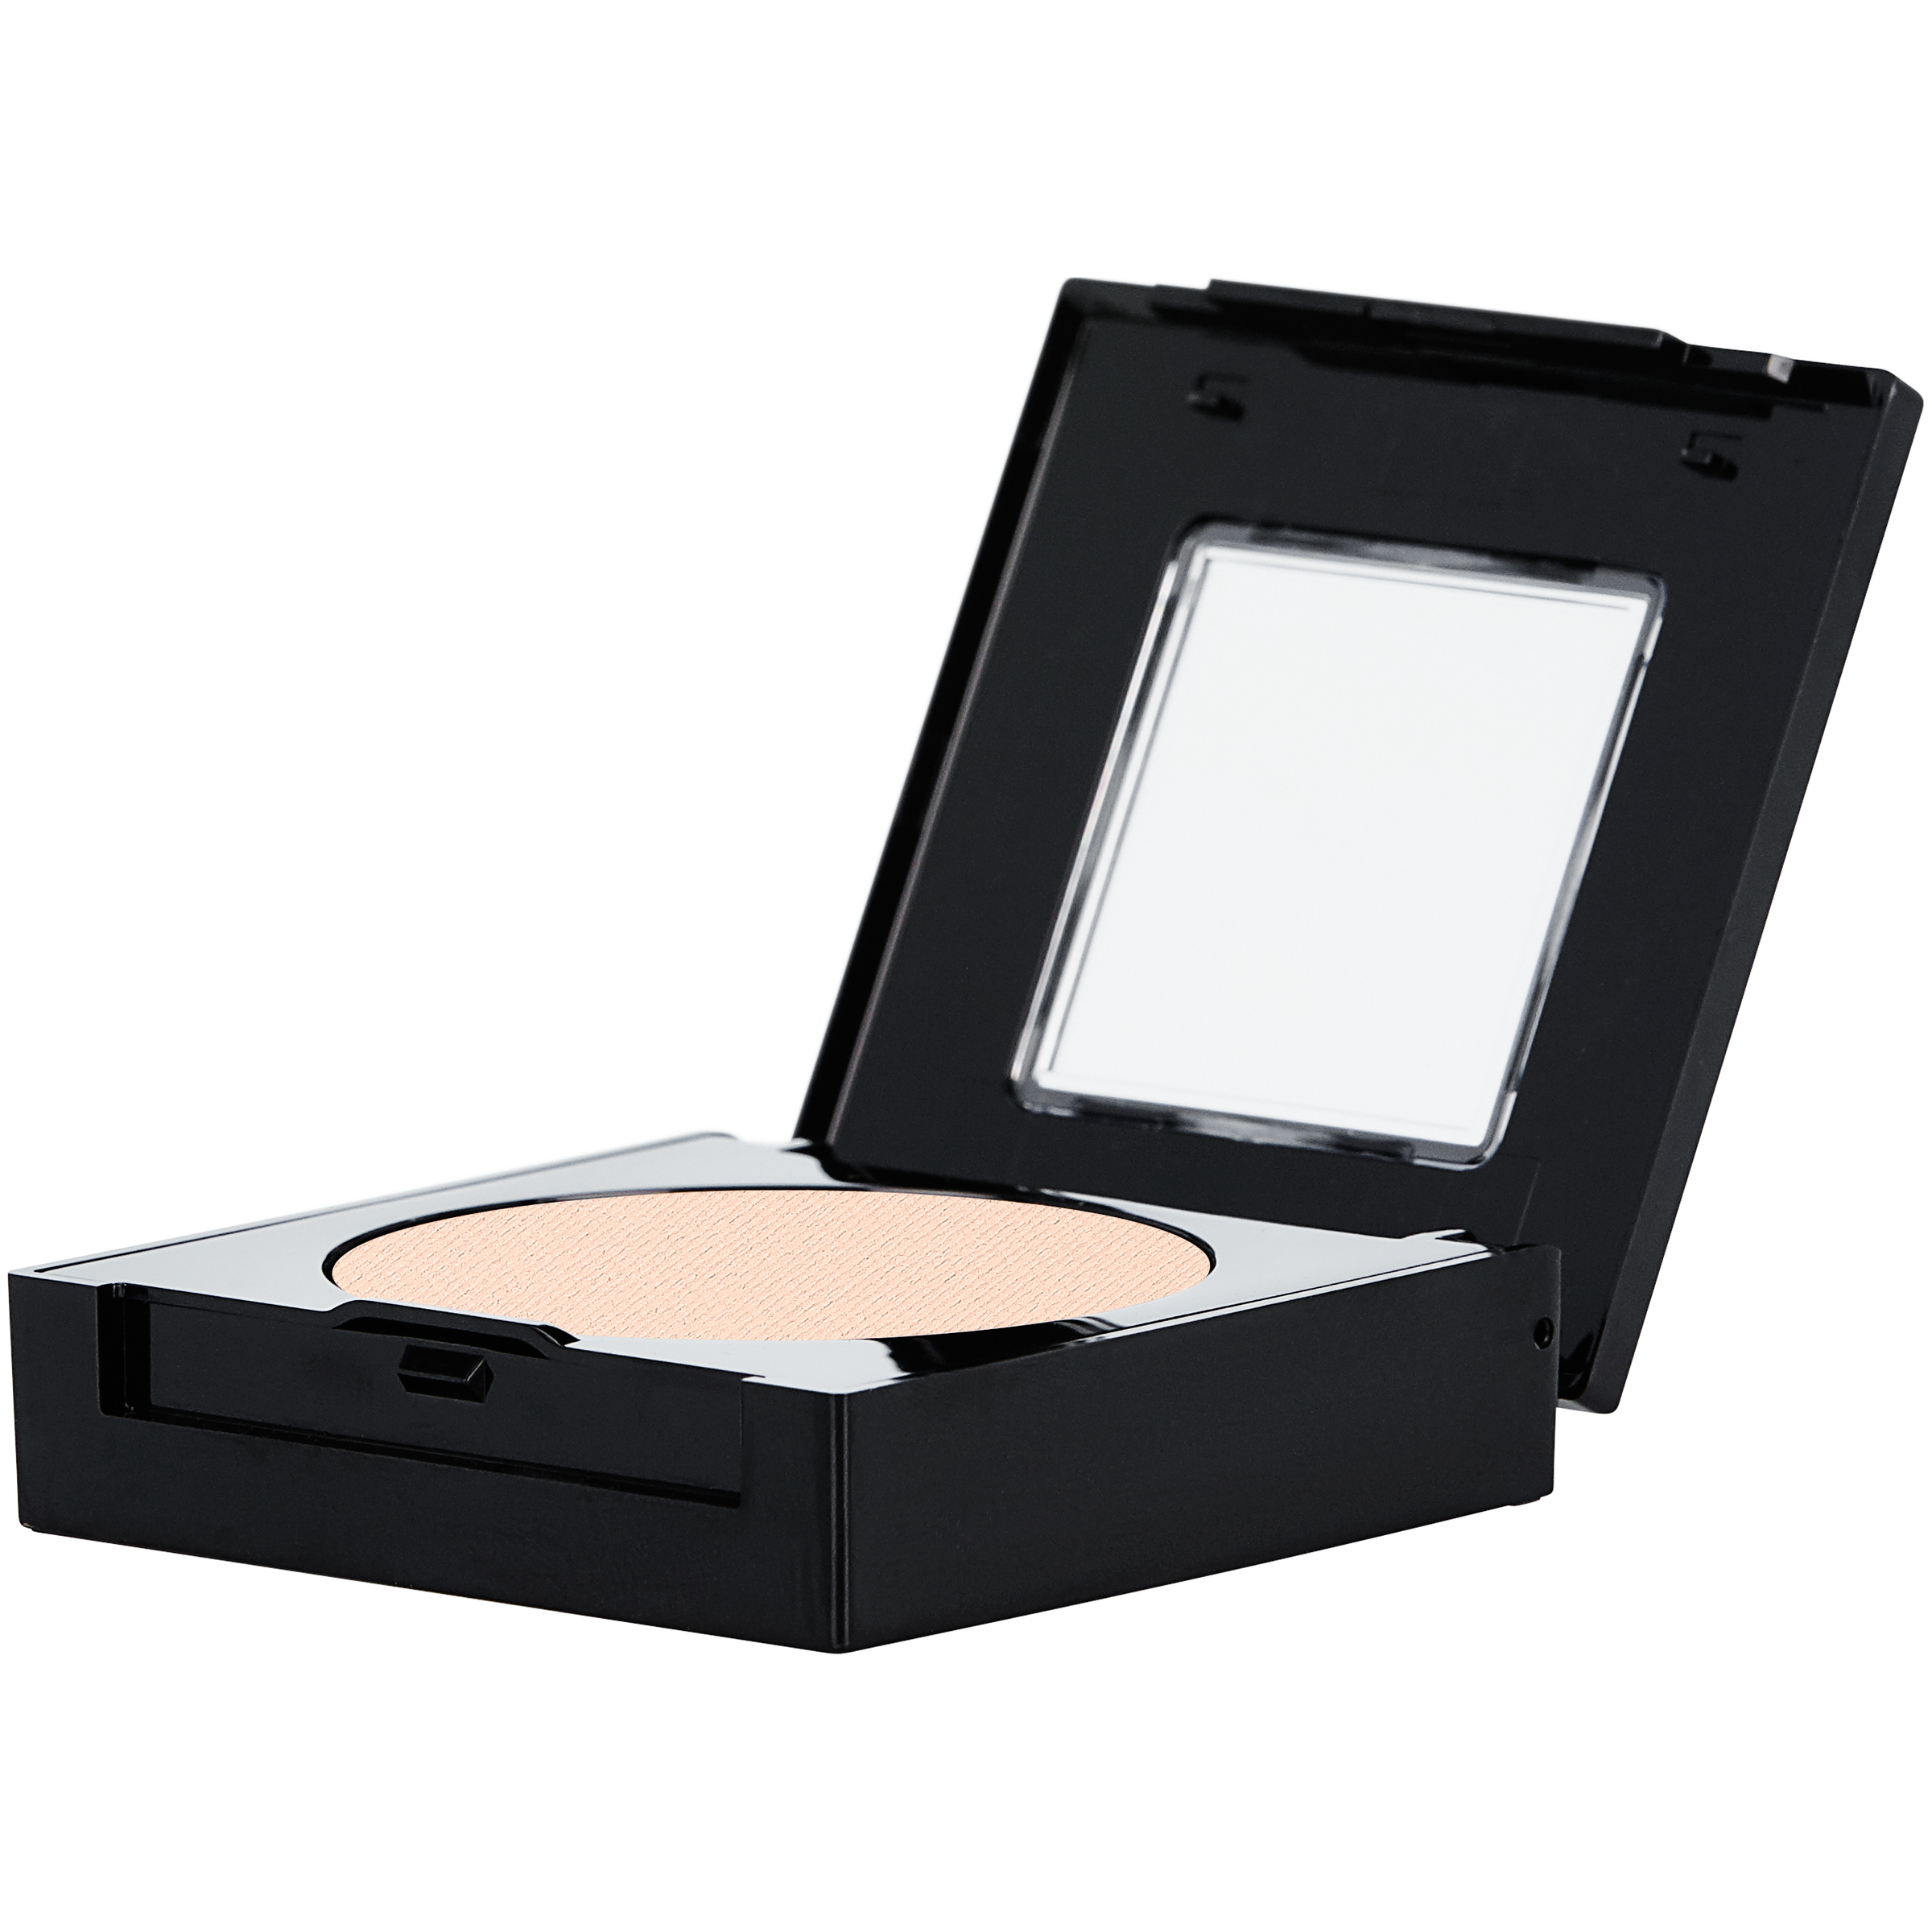 Maybelline Fit Me Set + Smooth Powder, Nude Beige - image 4 of 7